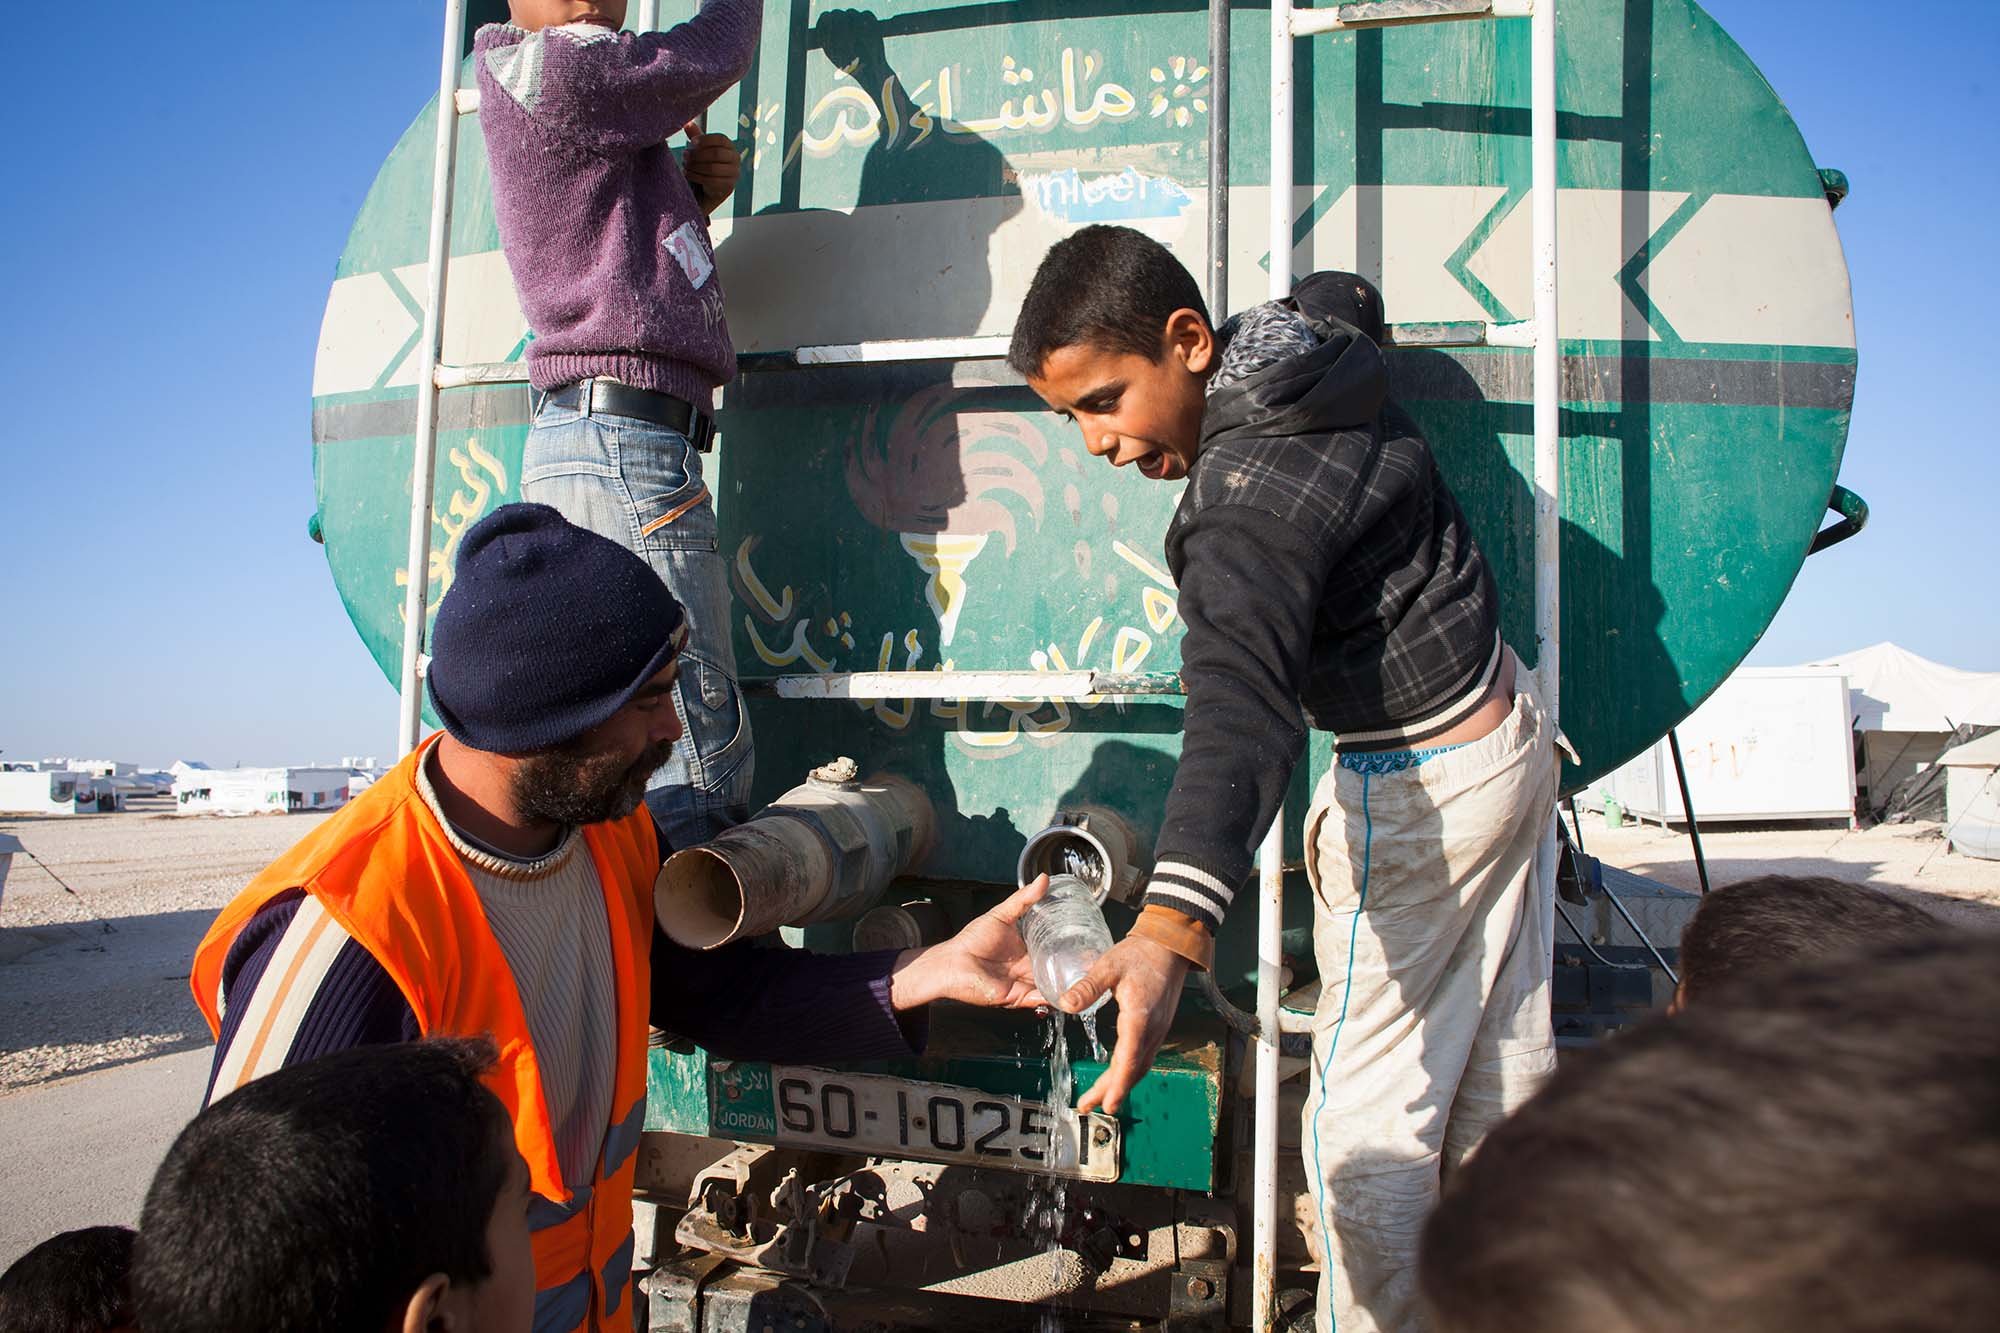  The water truck passes through district 4 of Zaatari refugee camp and the children scramble to make sure they get water for themselves and their families.  